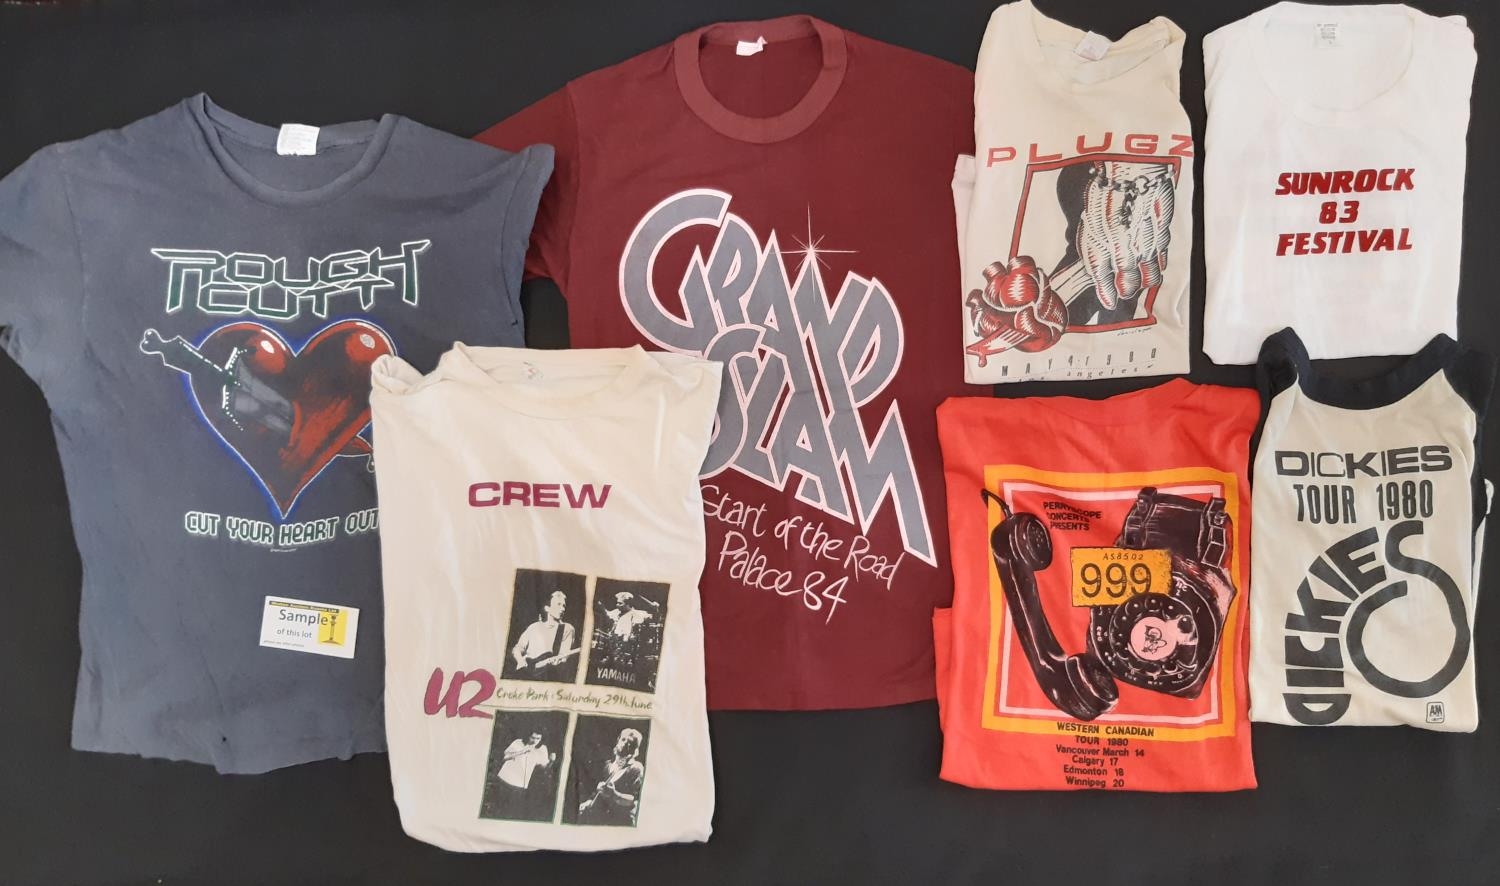 16 tour T shirts from the 1980's-90's for bands/ tours including 999, Eric Burdon, U2, The